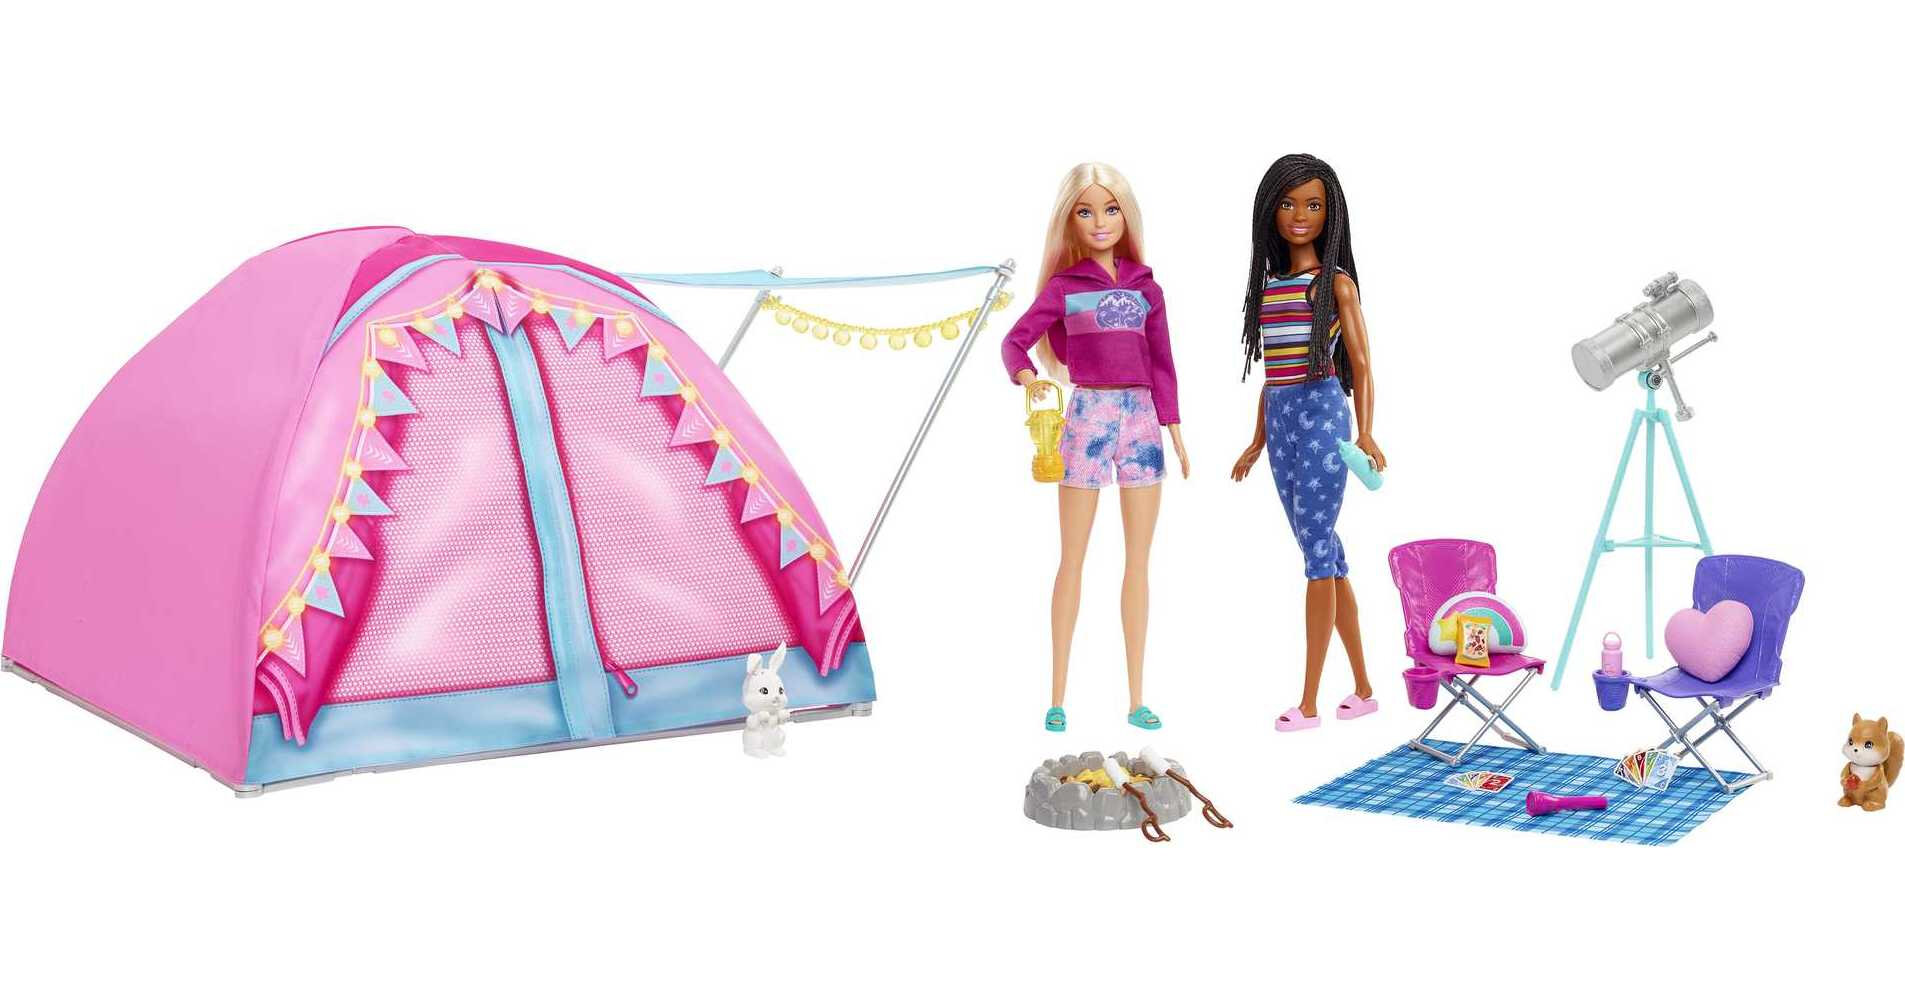 Barbie It Takes Two Let's Go Camping Tent Playset with Brooklyn & Malibu Dolls & 20 Accessories - image 1 of 7